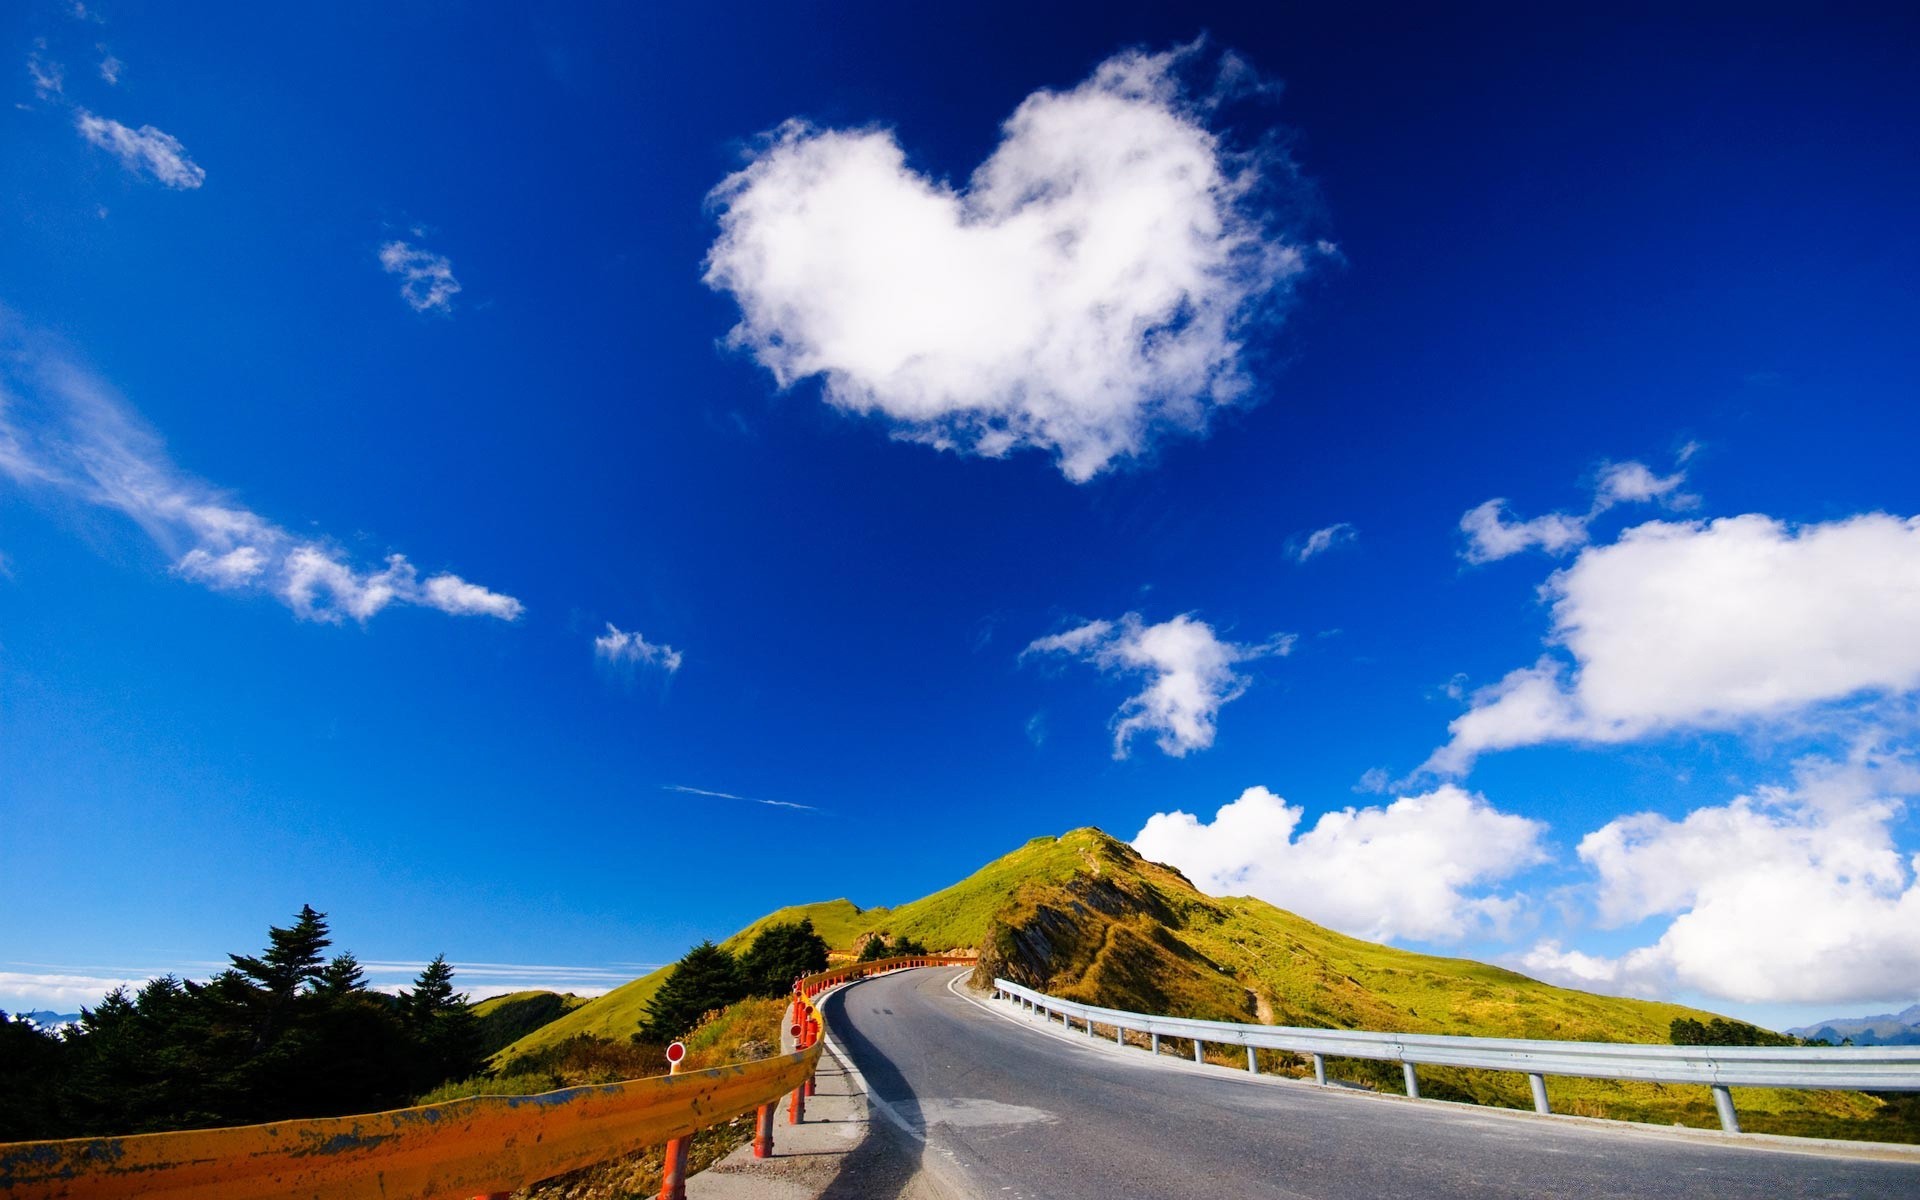 hearts travel sky road outdoors landscape nature scenic mountain daylight